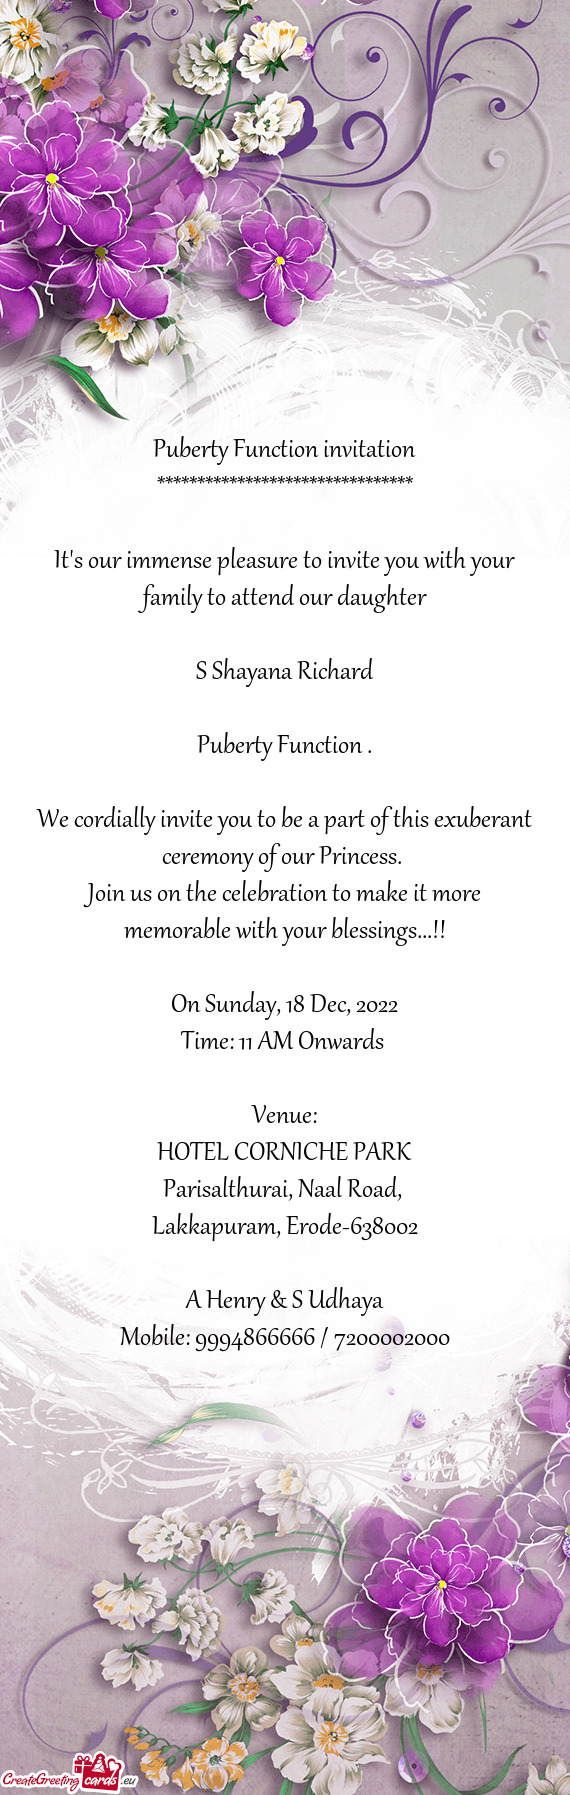 We cordially invite you to be a part of this exuberant ceremony of our Princess